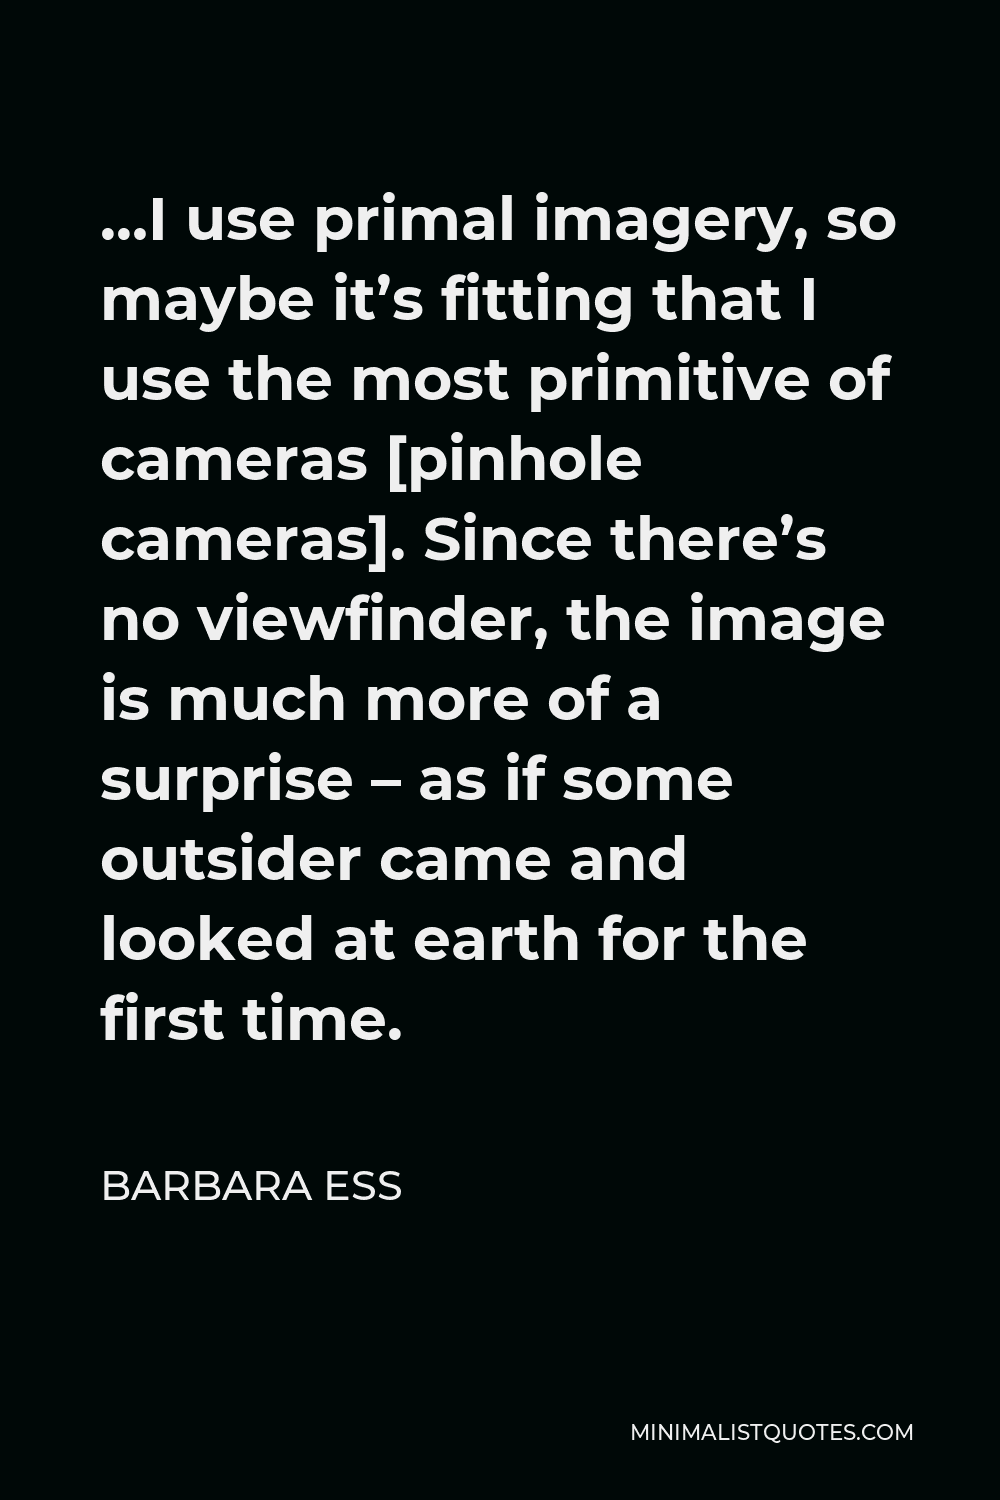 Barbara Ess Quote - …I use primal imagery, so maybe it’s fitting that I use the most primitive of cameras [pinhole cameras]. Since there’s no viewfinder, the image is much more of a surprise – as if some outsider came and looked at earth for the first time.